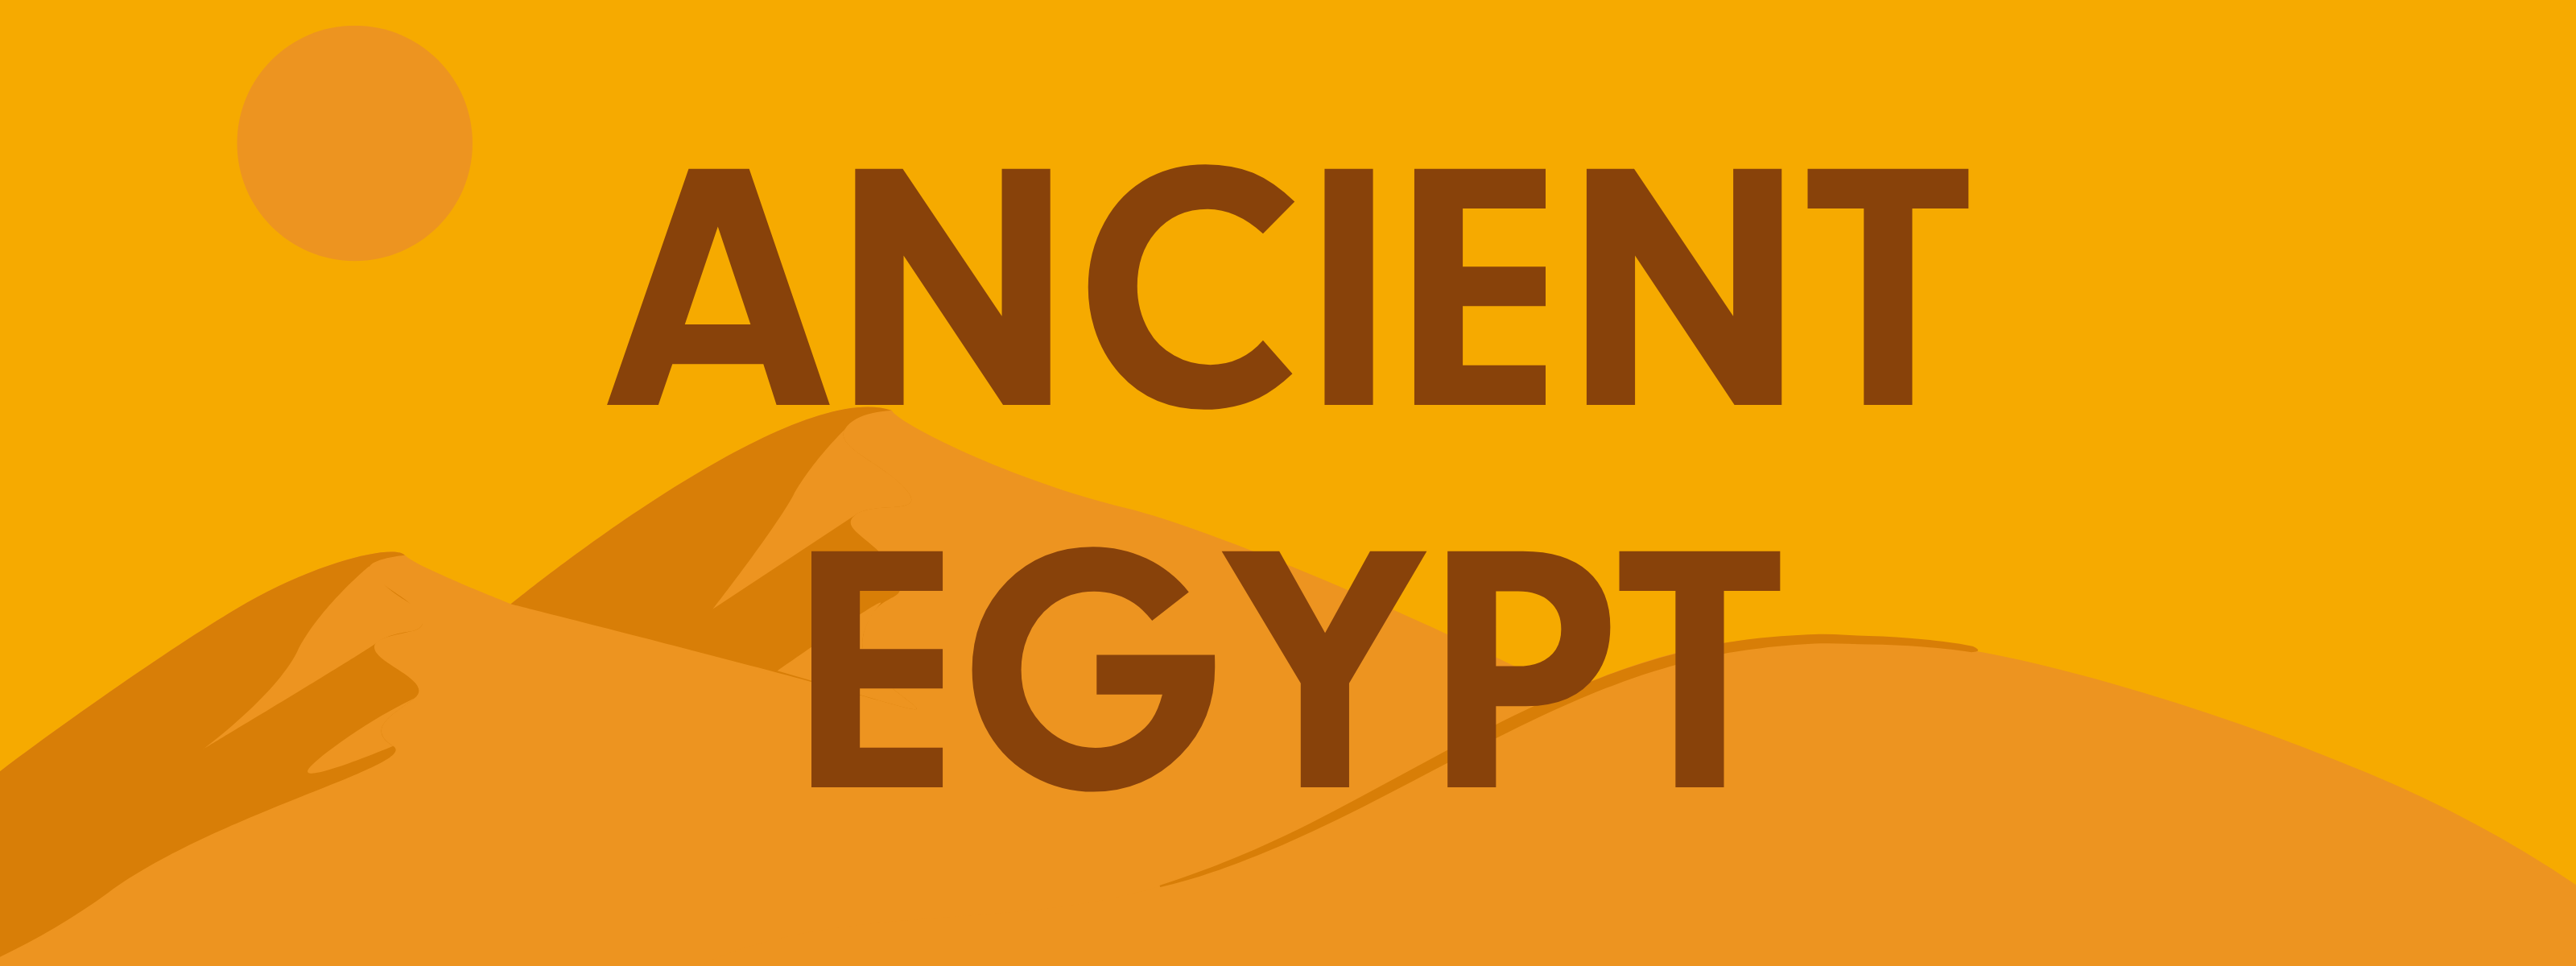 Golden yellow sand dunes and a waning sun with the words "Ancient Egypt" over the background.